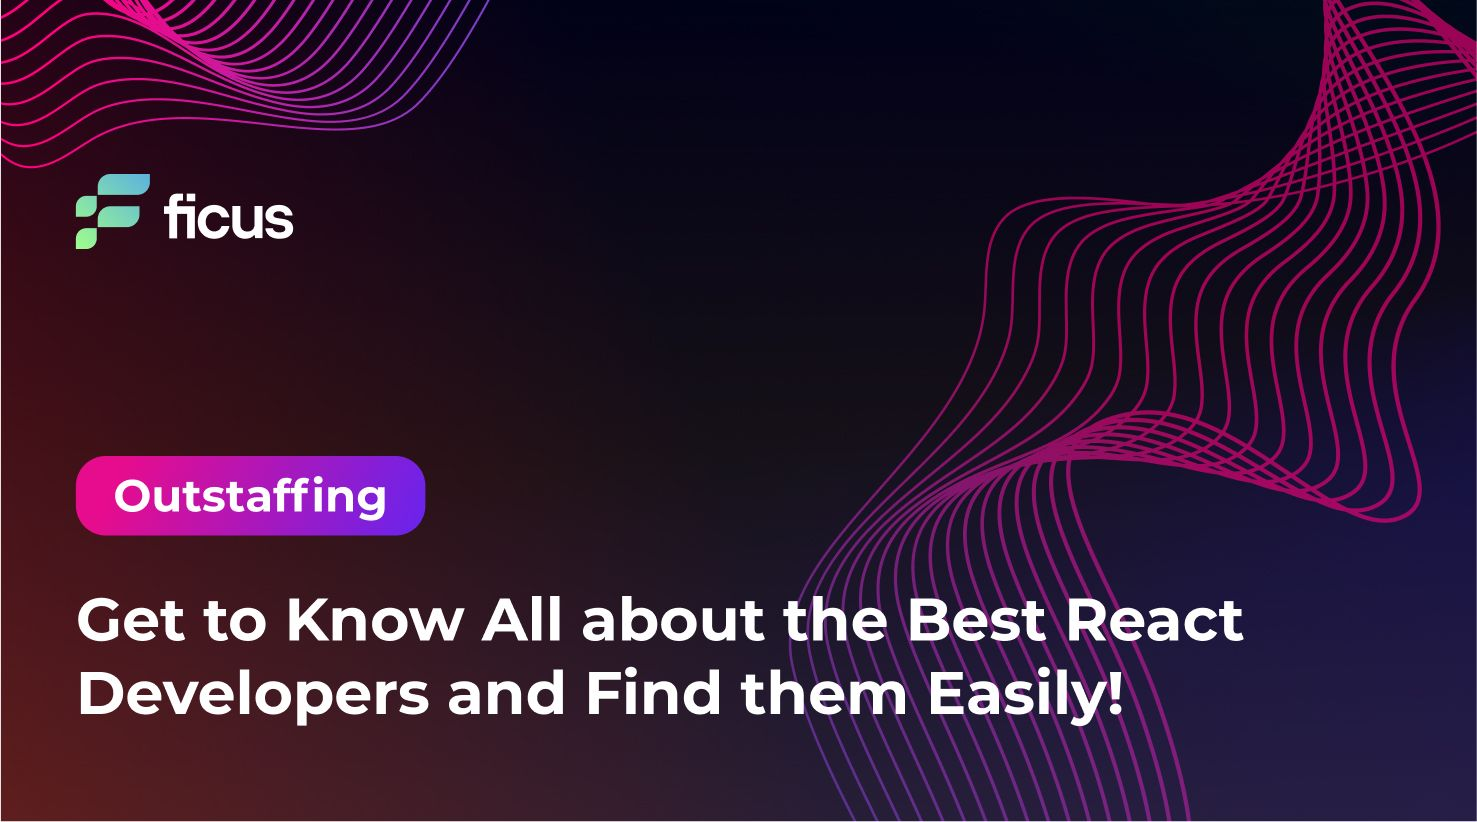 Get to Know All about the Best React Developers and Find them Easily!